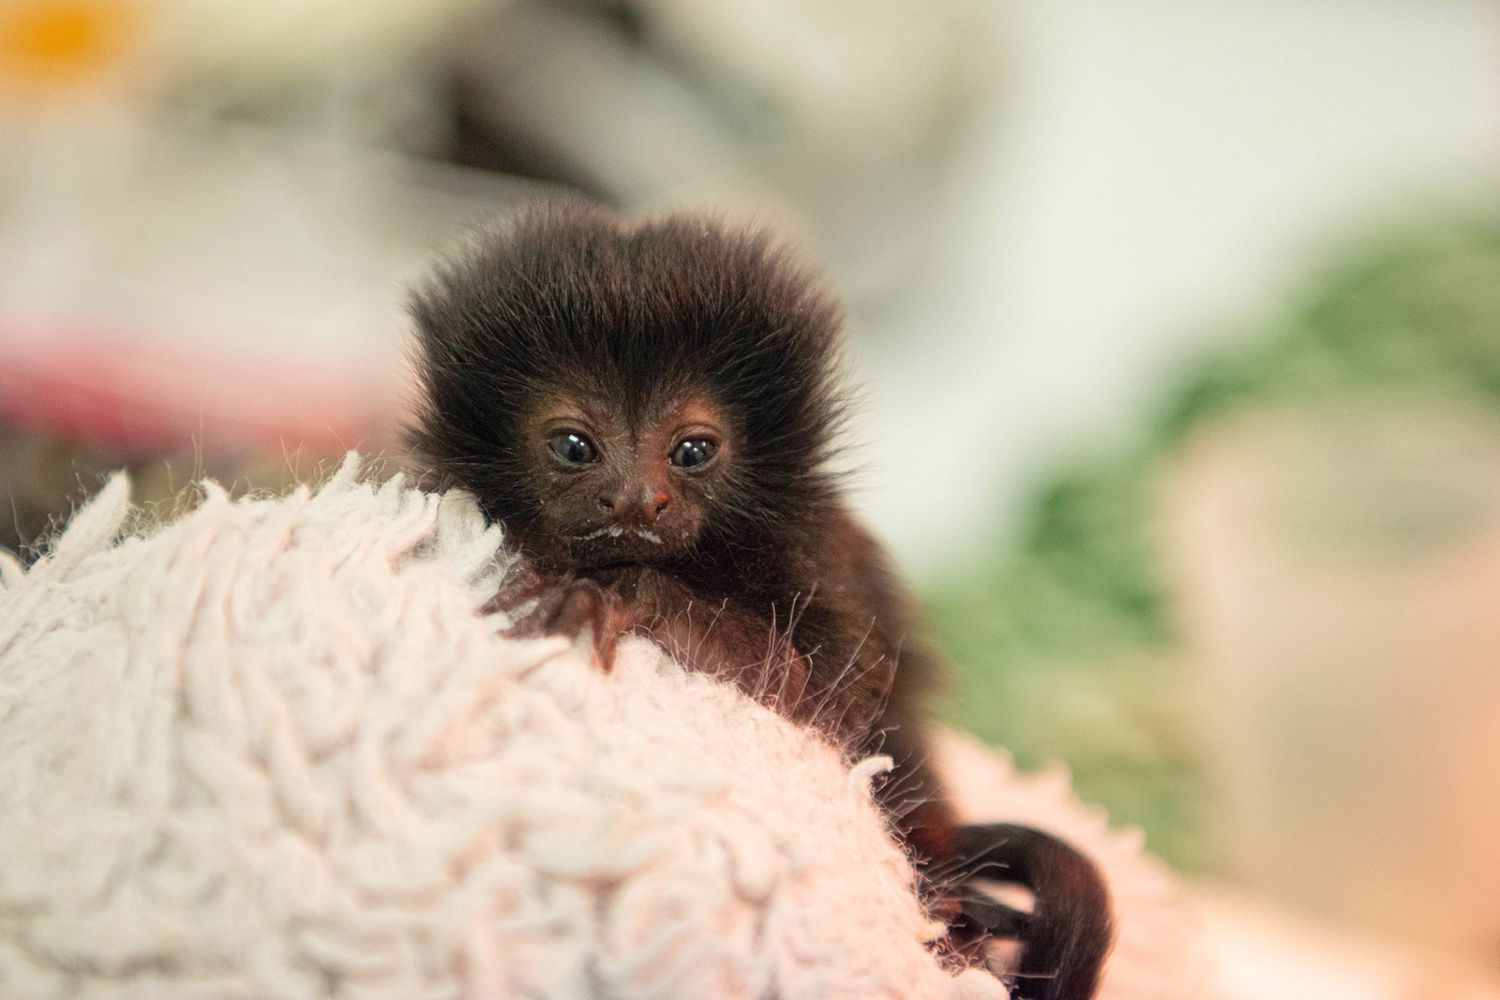 tiny baby monkey that is being raised by the Houston Zoo